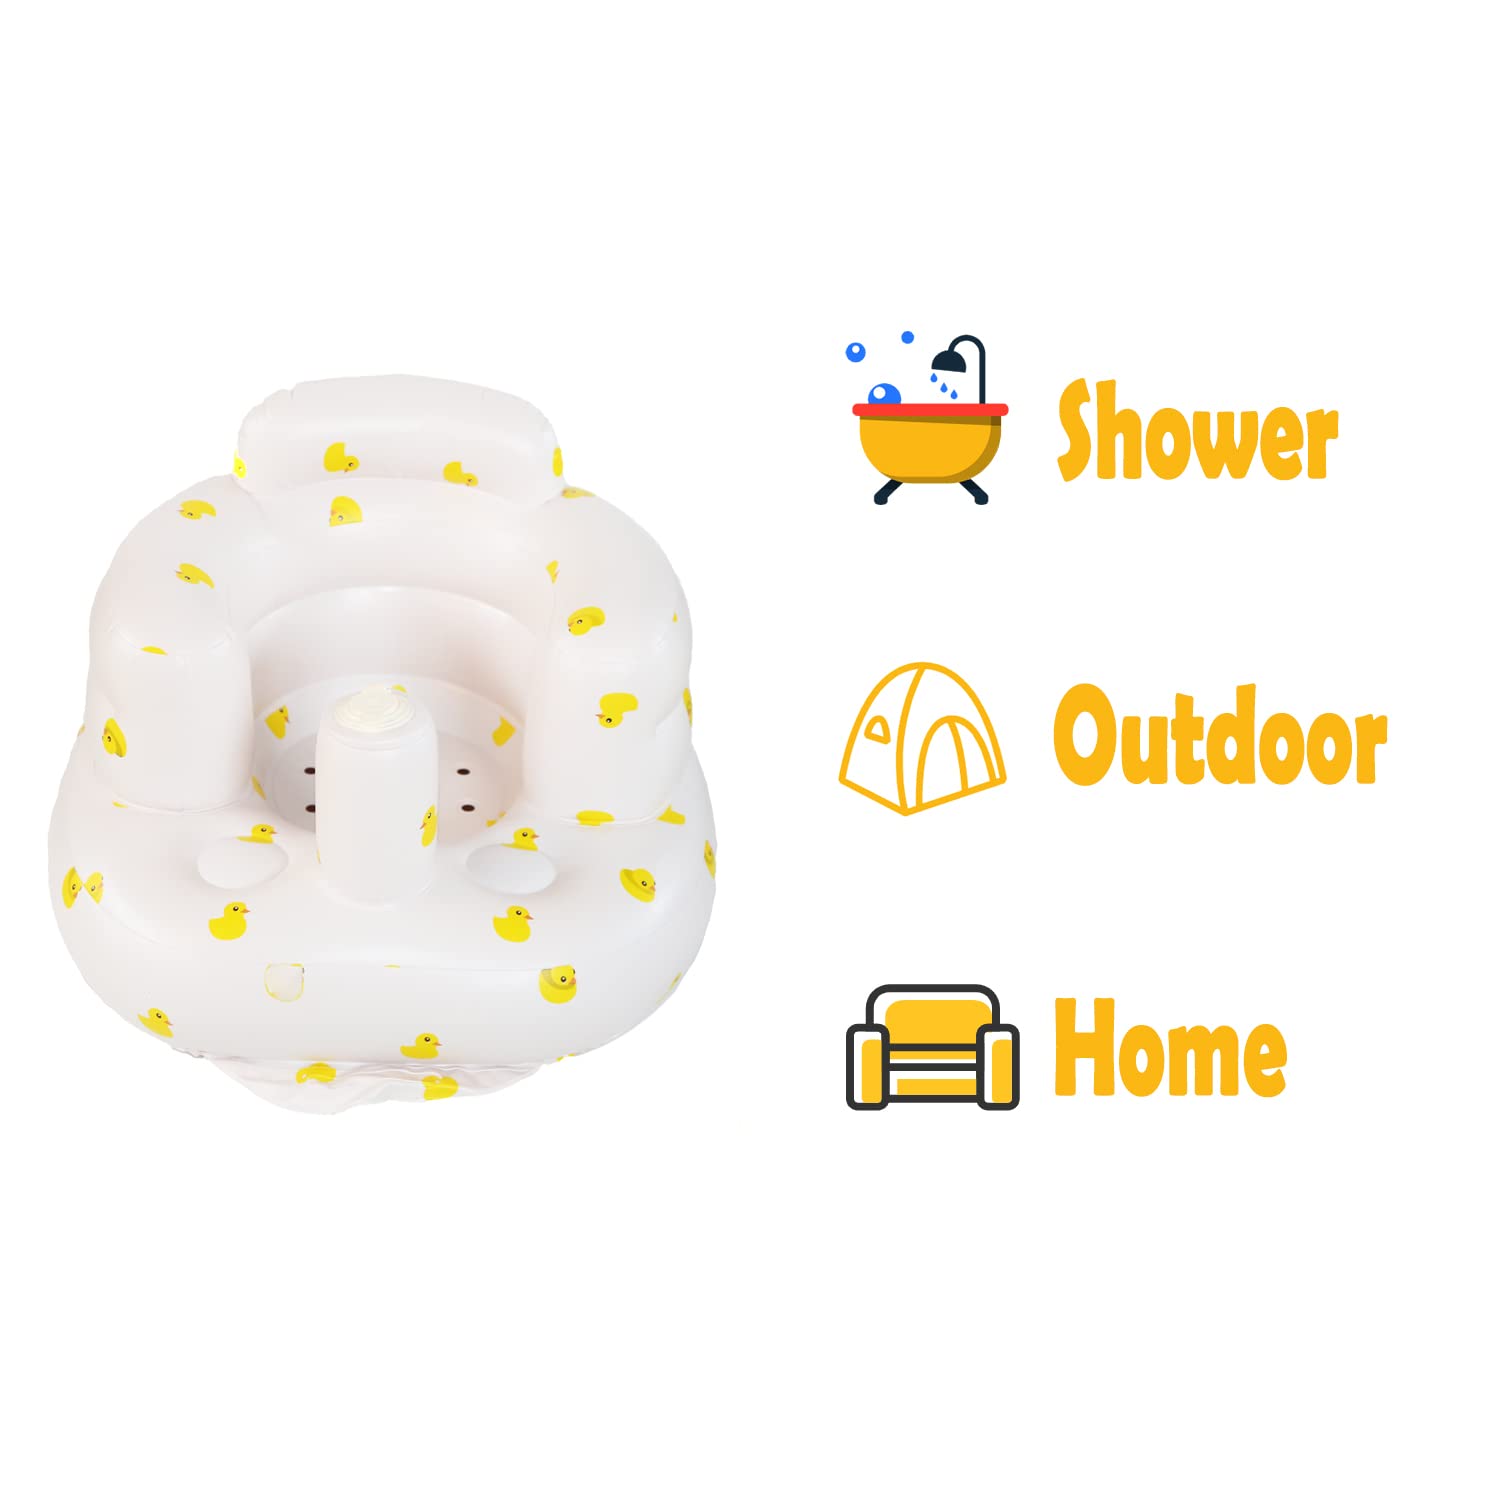 Chapver Baby Seats for Sitting Up, Baby Bath Seat Portable Summer Toddler Beach Chair, Inflatable Sit Me Up Floor Seat for 3 6 9 12 Months Toddlers, Shower Gifts for Baby Boys Girls, Yellow Duck